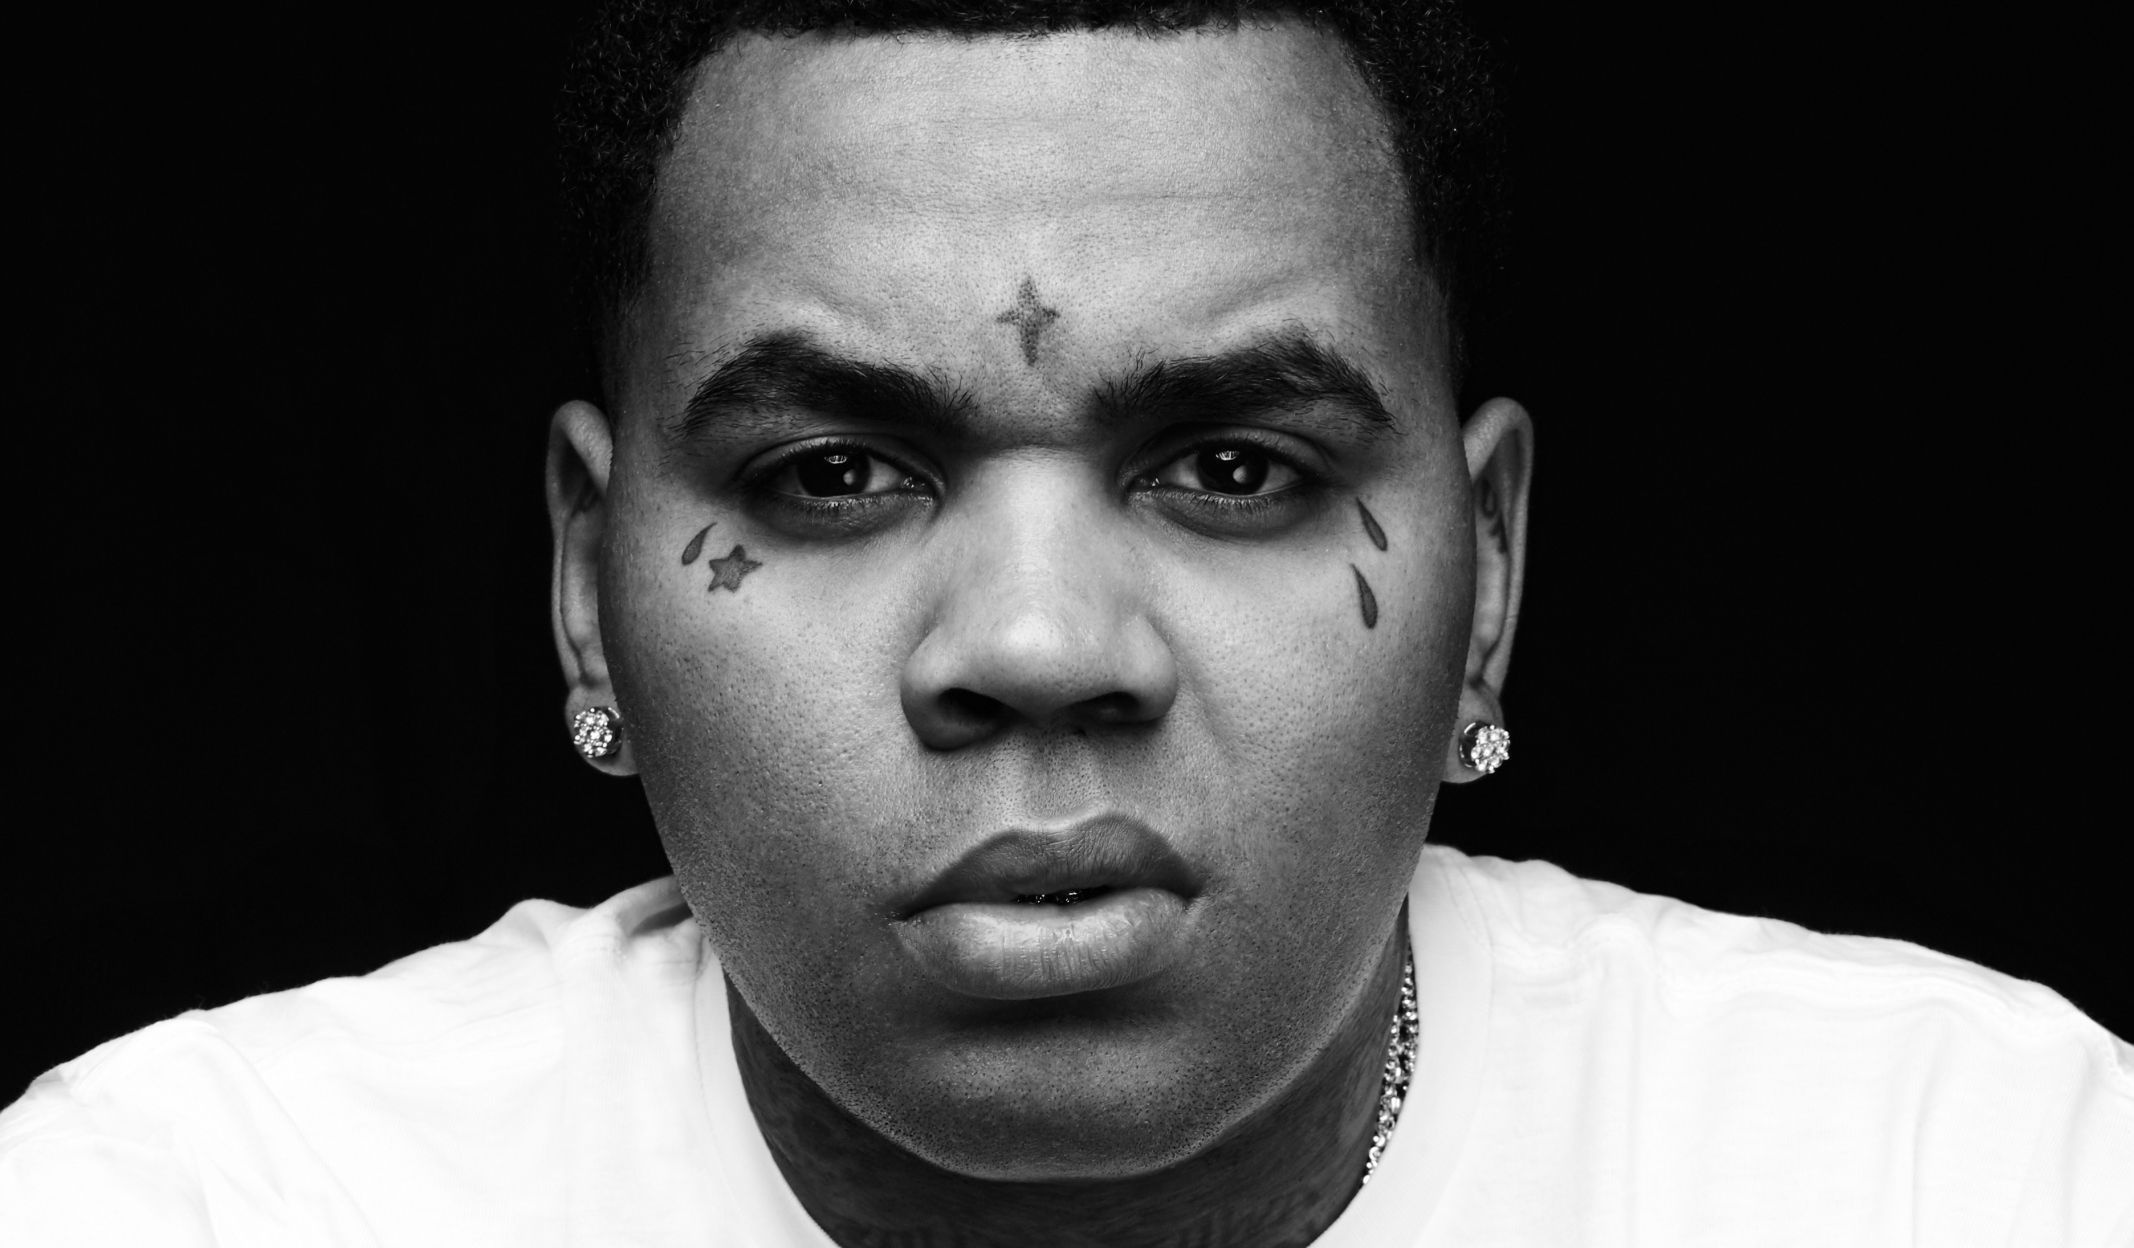 Kevin Gates, Top wallpapers, Free backgrounds, Trendy visuals, 2140x1250 HD Desktop